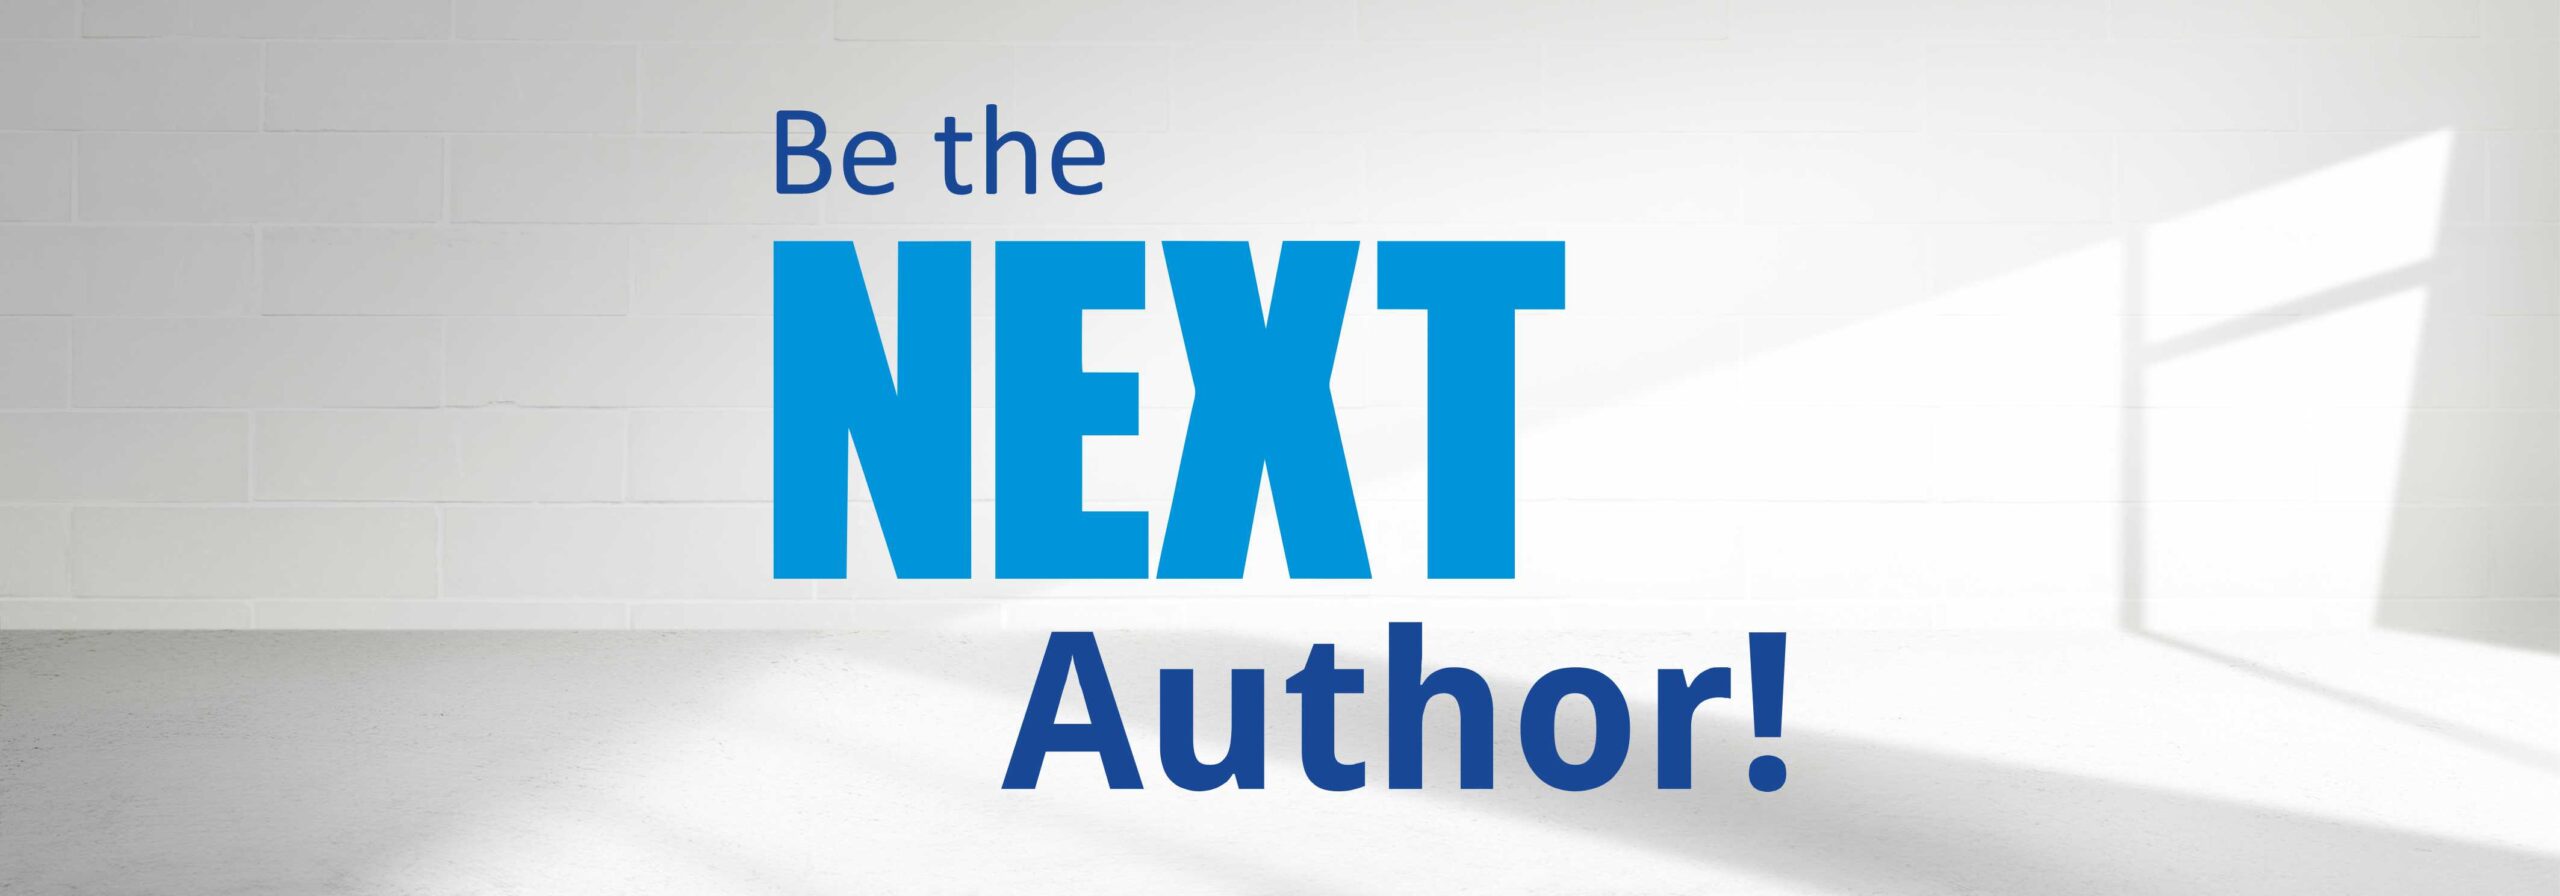 Be the NEXT Author!